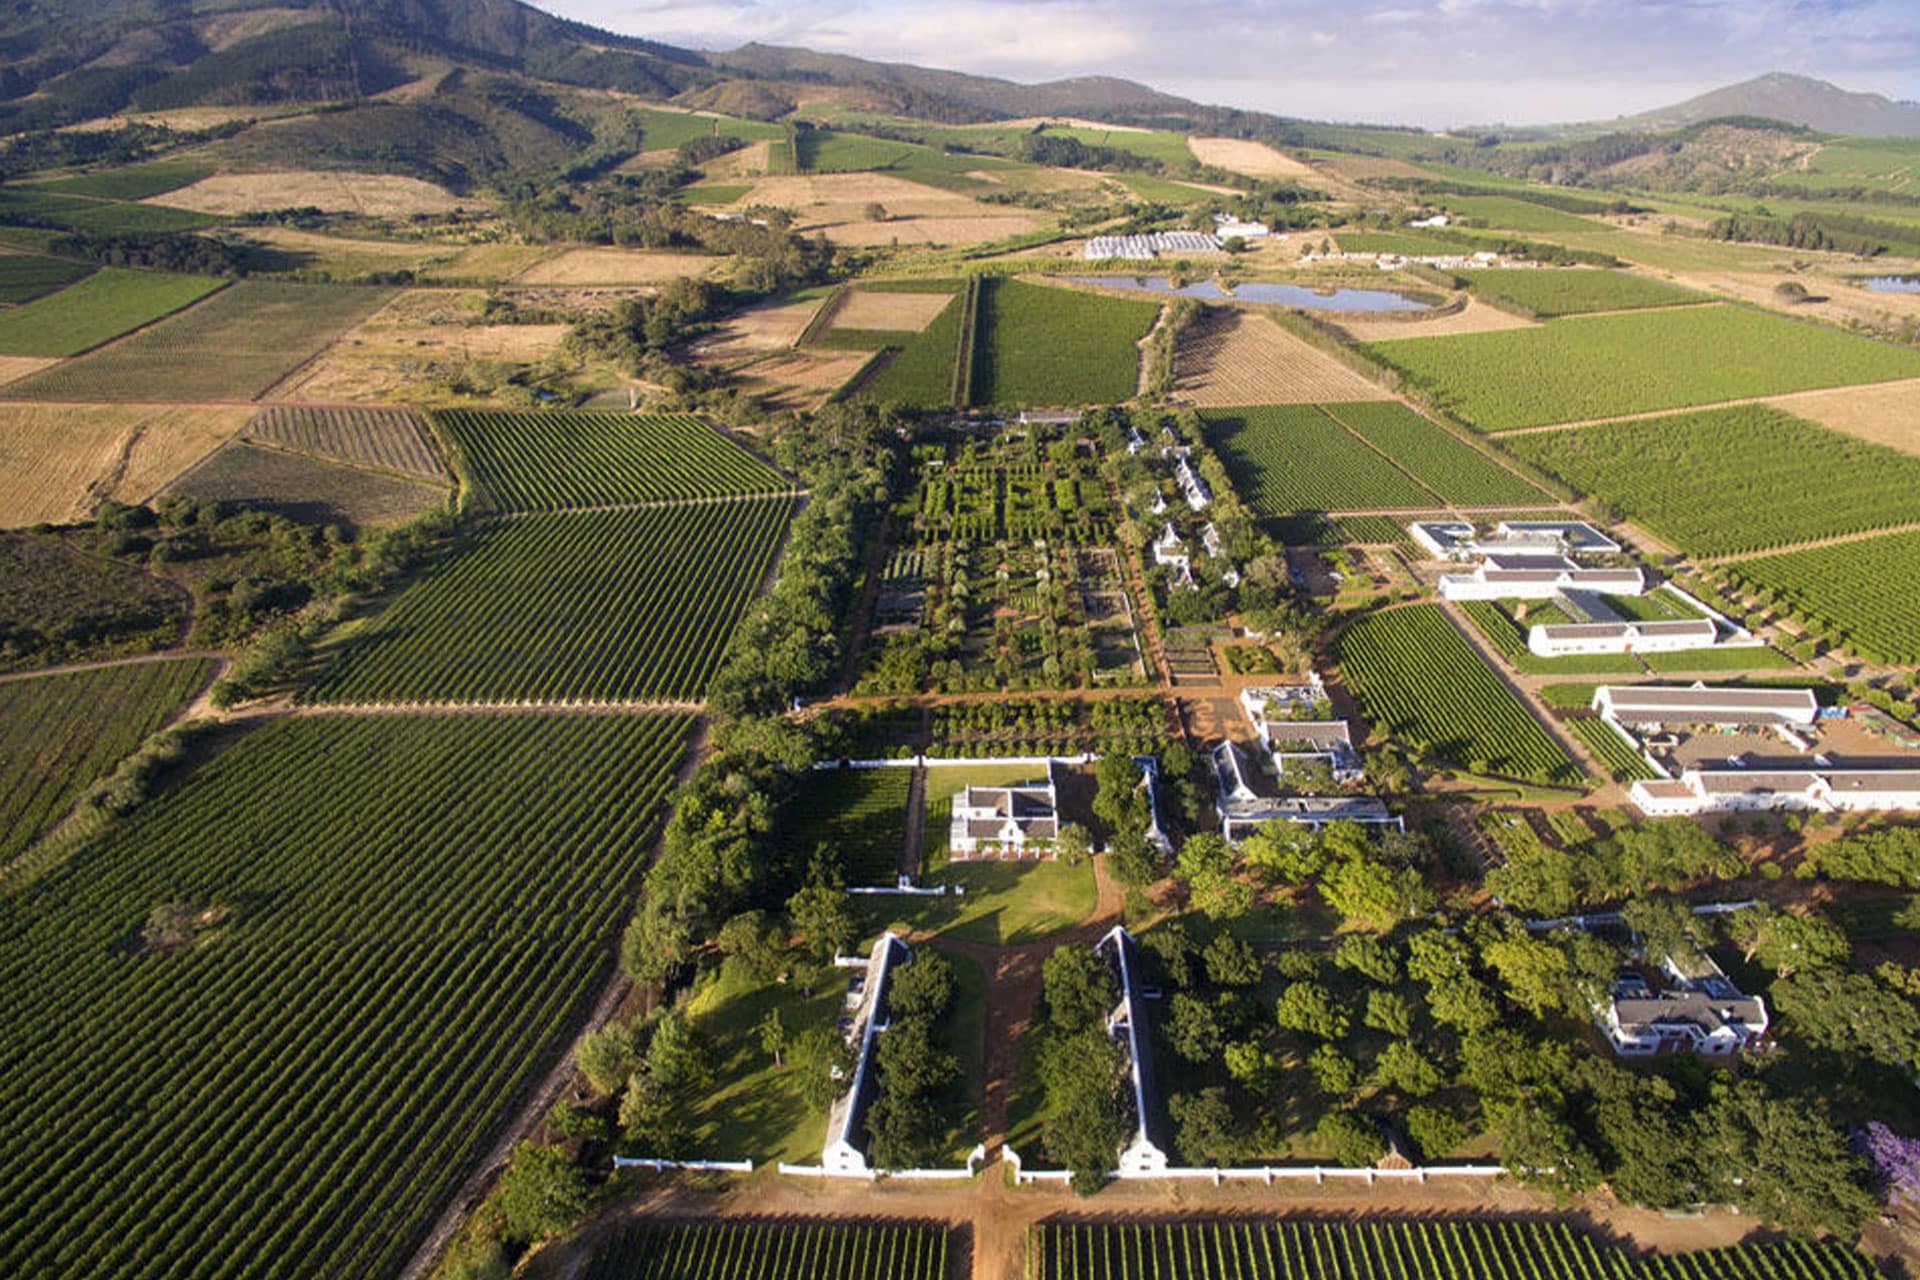 A drone shot of Babylonstoren Farm and Hotel with vineyards and mountains.